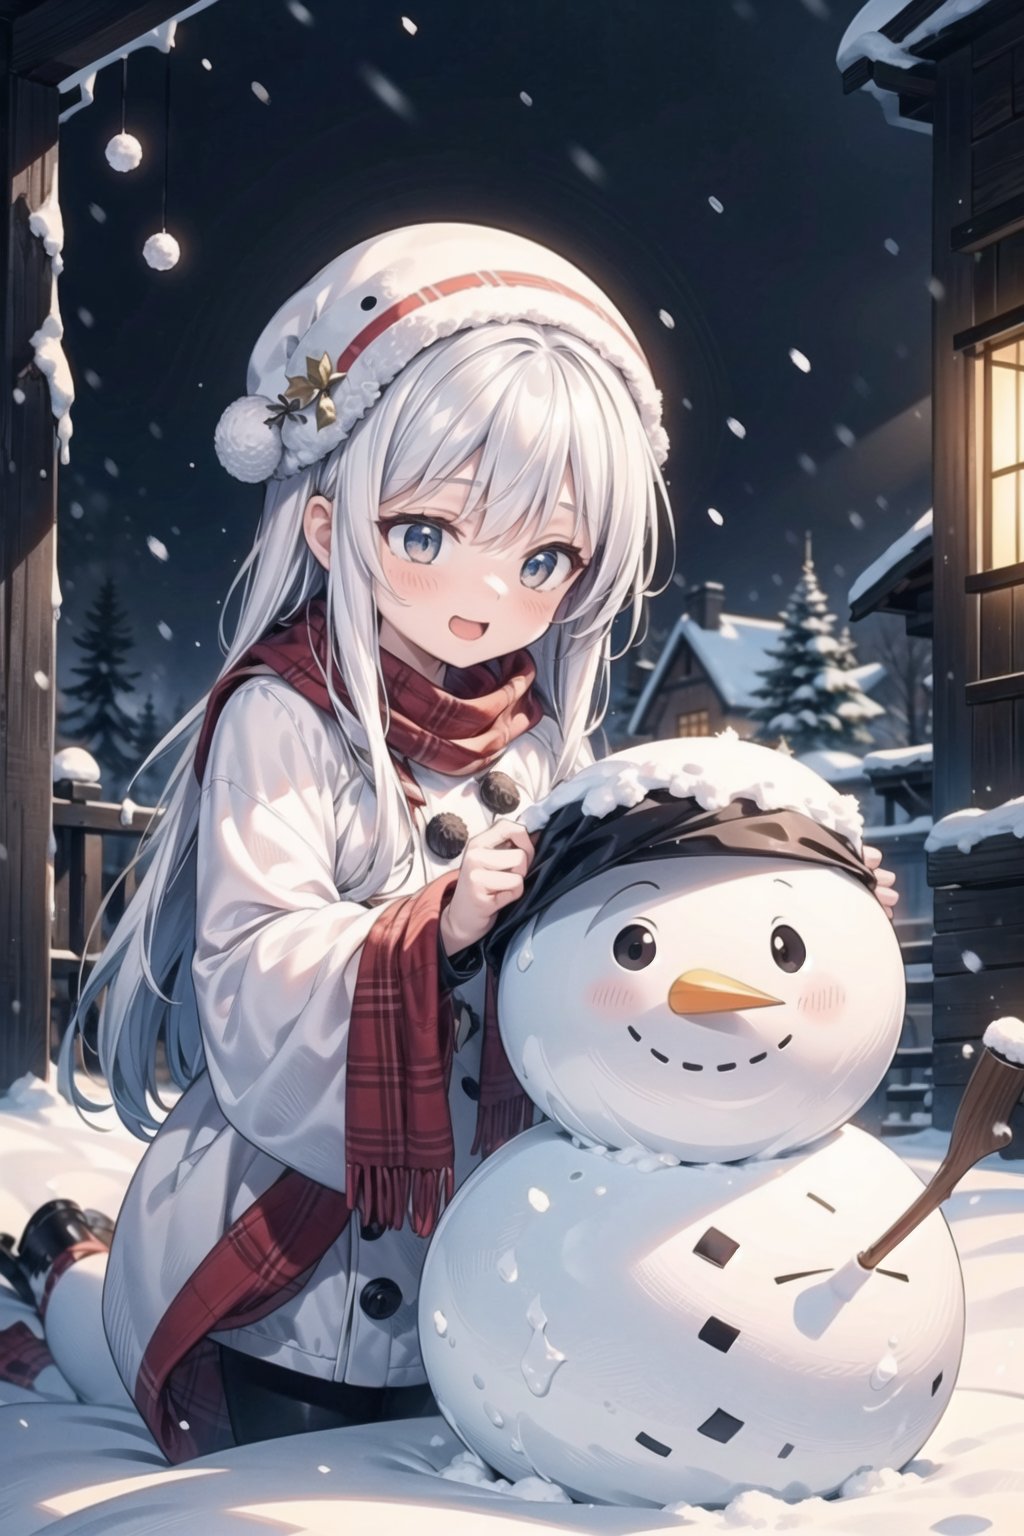 vibrant colors,  female,  masterpiece,  sharp focus,  best quality,  depth of field,  cinematic lighting,  ((solo,  adult woman)),  (illustration,  8k CG,  extremely detailed),  masterpiece,  ultra-detailed, 1 girl,  long hair,  white hair,  red hair locks,  serene snowy landscape,  a girl joyfully shapes a snowman,  infusing the wintry scene with whimsy,  detailed illustration captures the delightful moment as she sculpts the snow into a charming companion,  epitomizing the magic of a snowy day,  dressed in winter attire,  the landscape is adorned with the soft glow of falling snowflakes,  creating a tranquil ambiance. Each pat of snow forms the snowman's features,  and the scene resonates with the laughter and merriment of a cherished winter tradition.,<lora:EMS-50097-EMS:0.400000>,<lora:EMS-179-EMS:0.400000>,<lora:EMS-173539-EMS:0.400000>